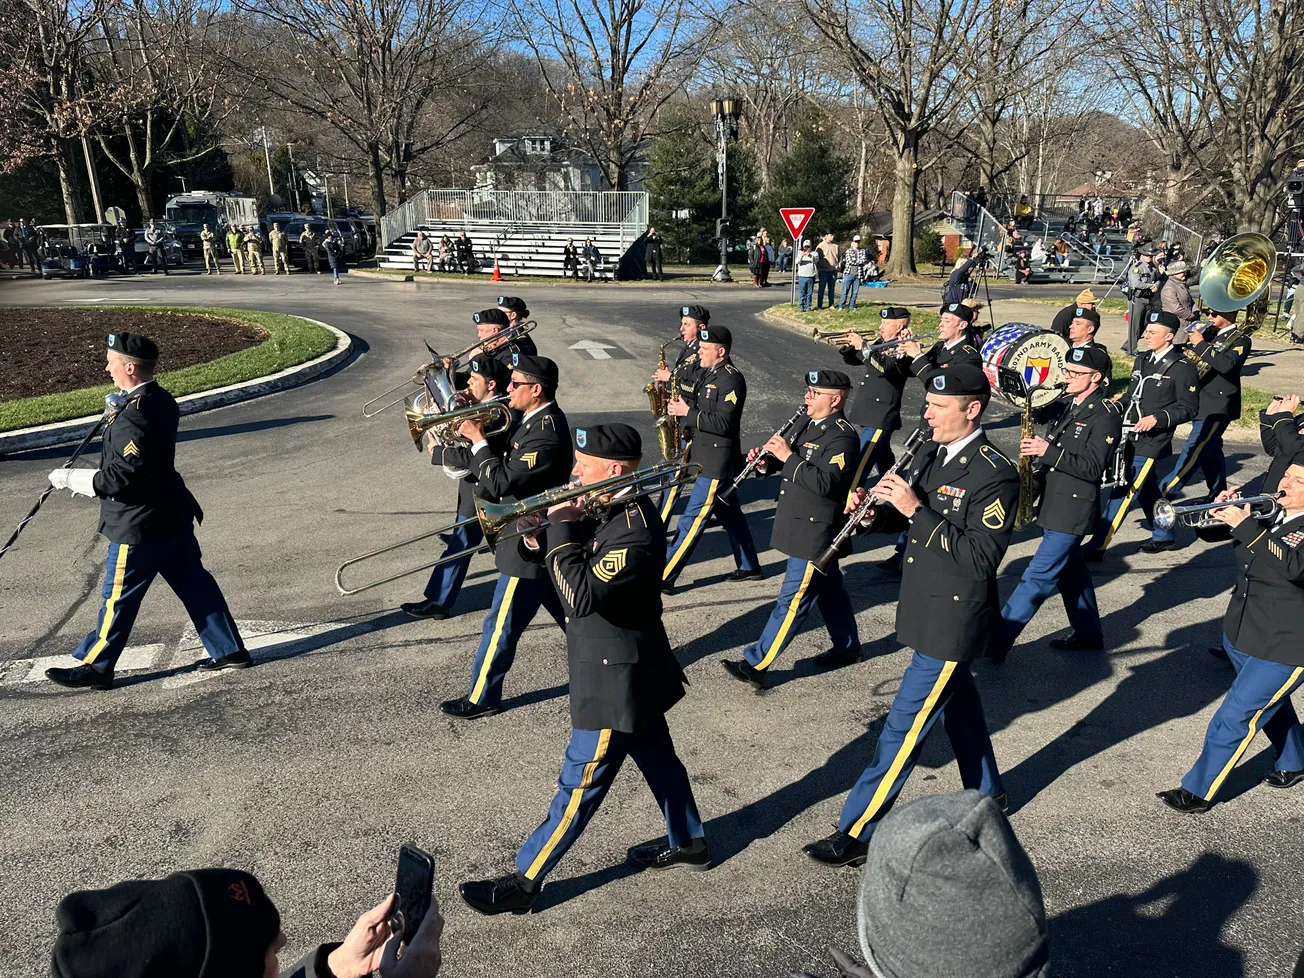 Photos from the Inauguration Parade